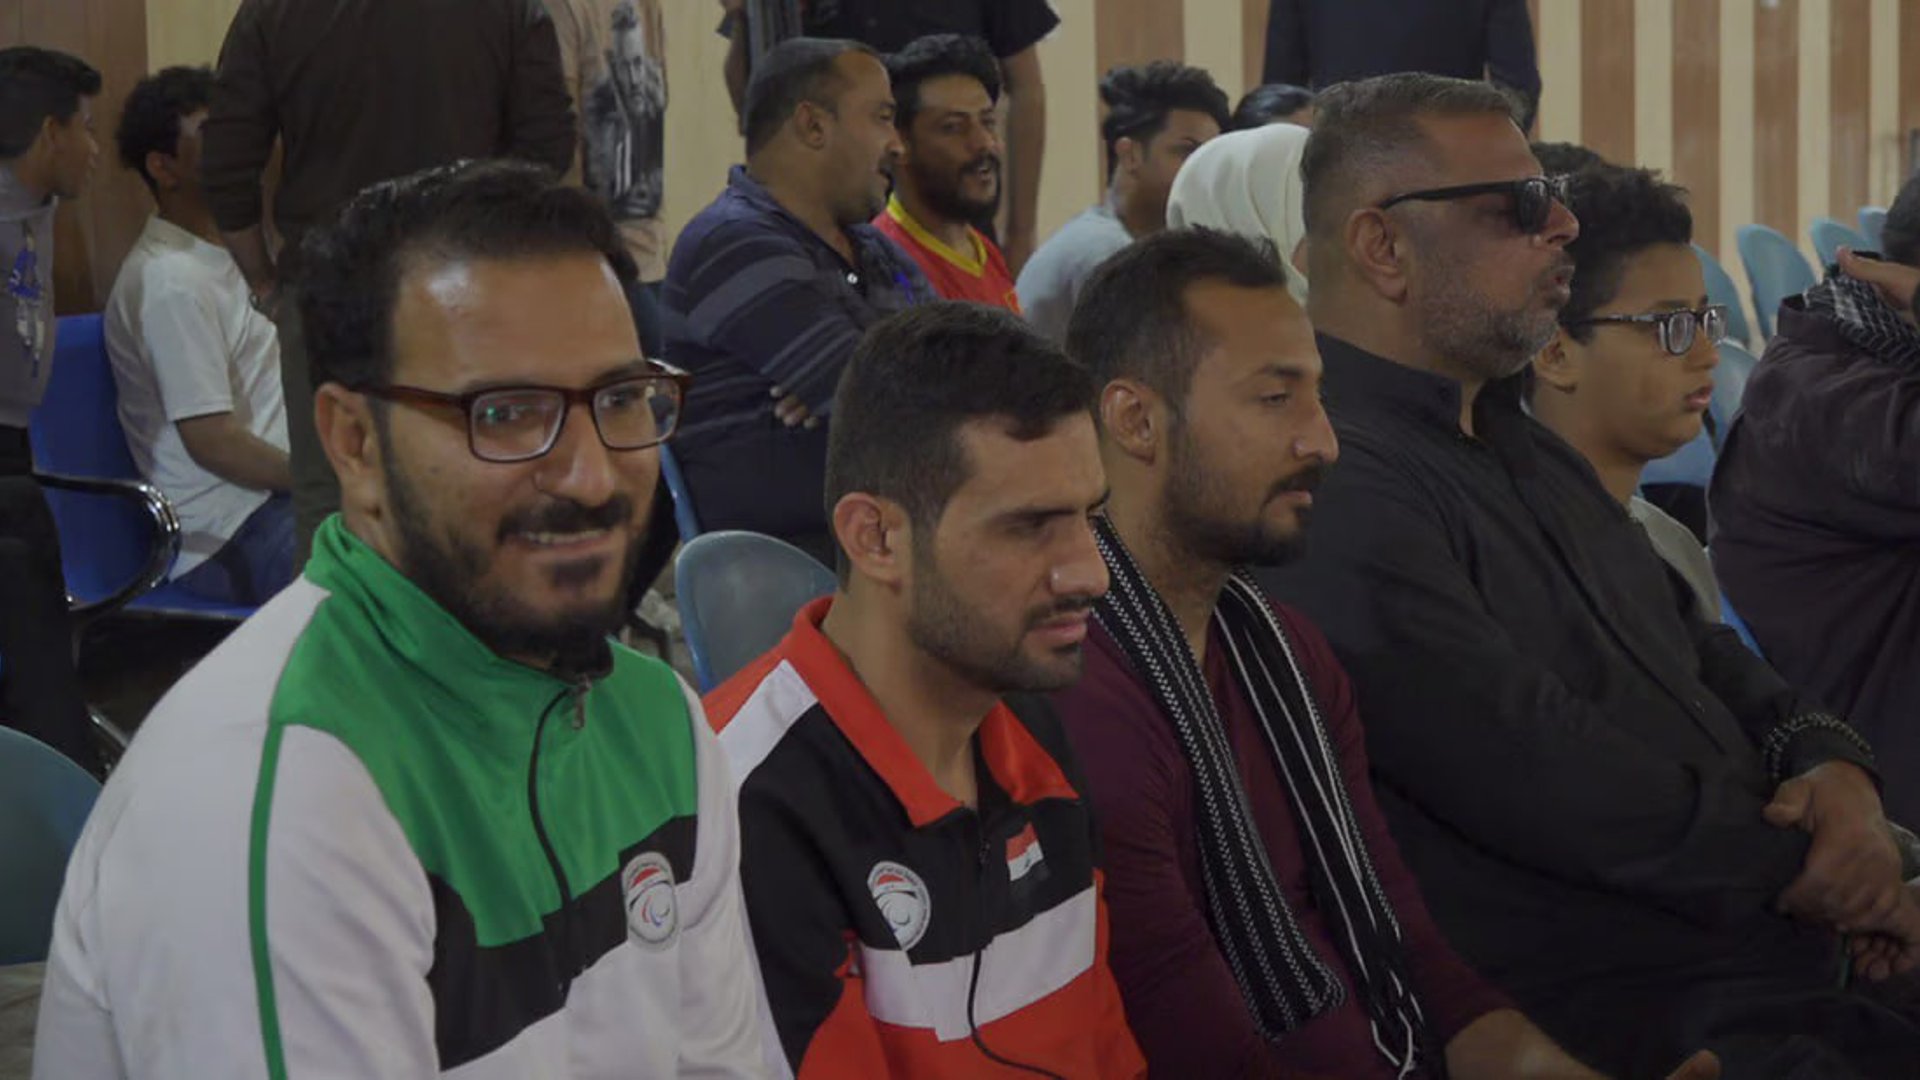 Team from Basra honored for winning first place in Iraq blind football championship